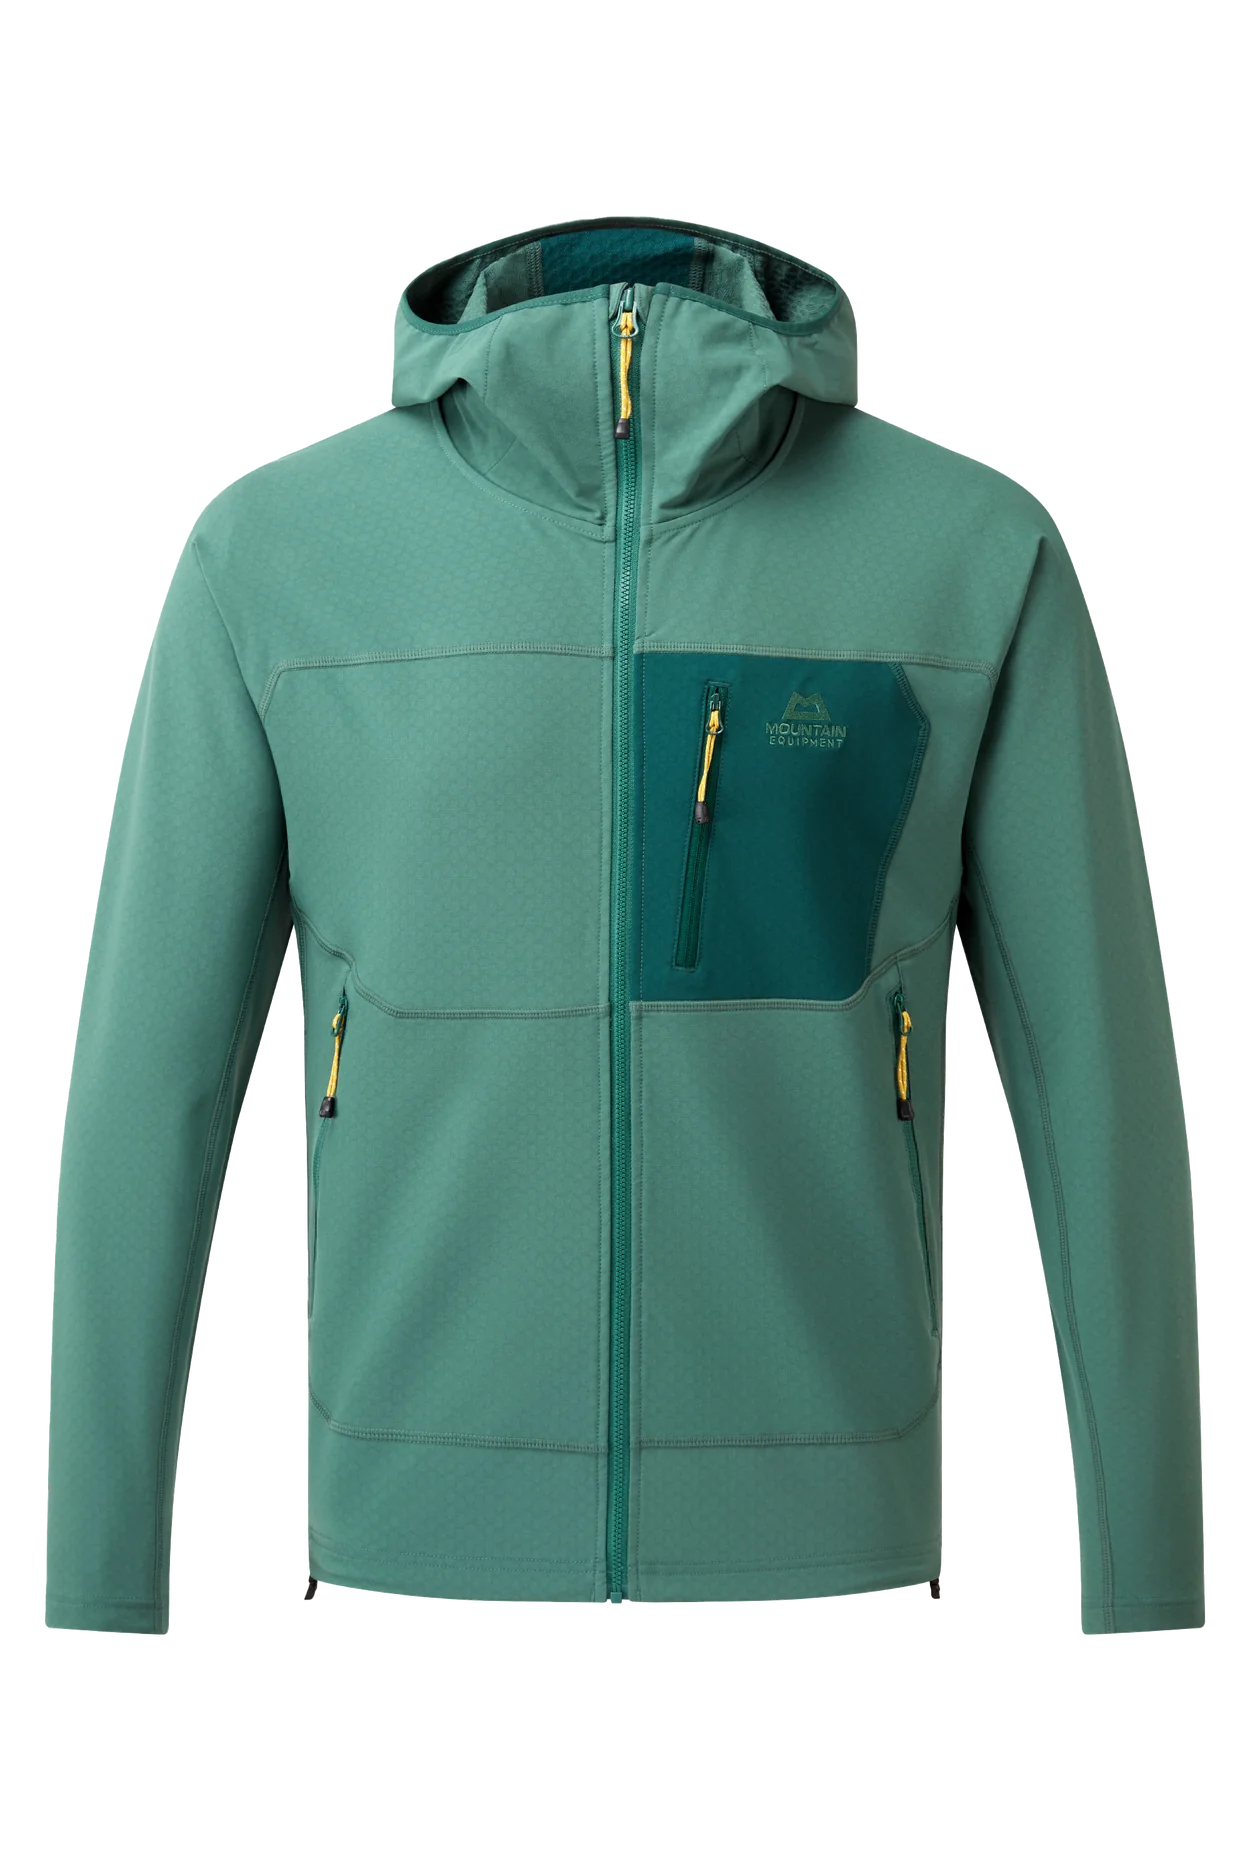 Mountain Equipment Men's Hooded Jacket | Mountain Equipment | Portwest - The Outdoor Shop